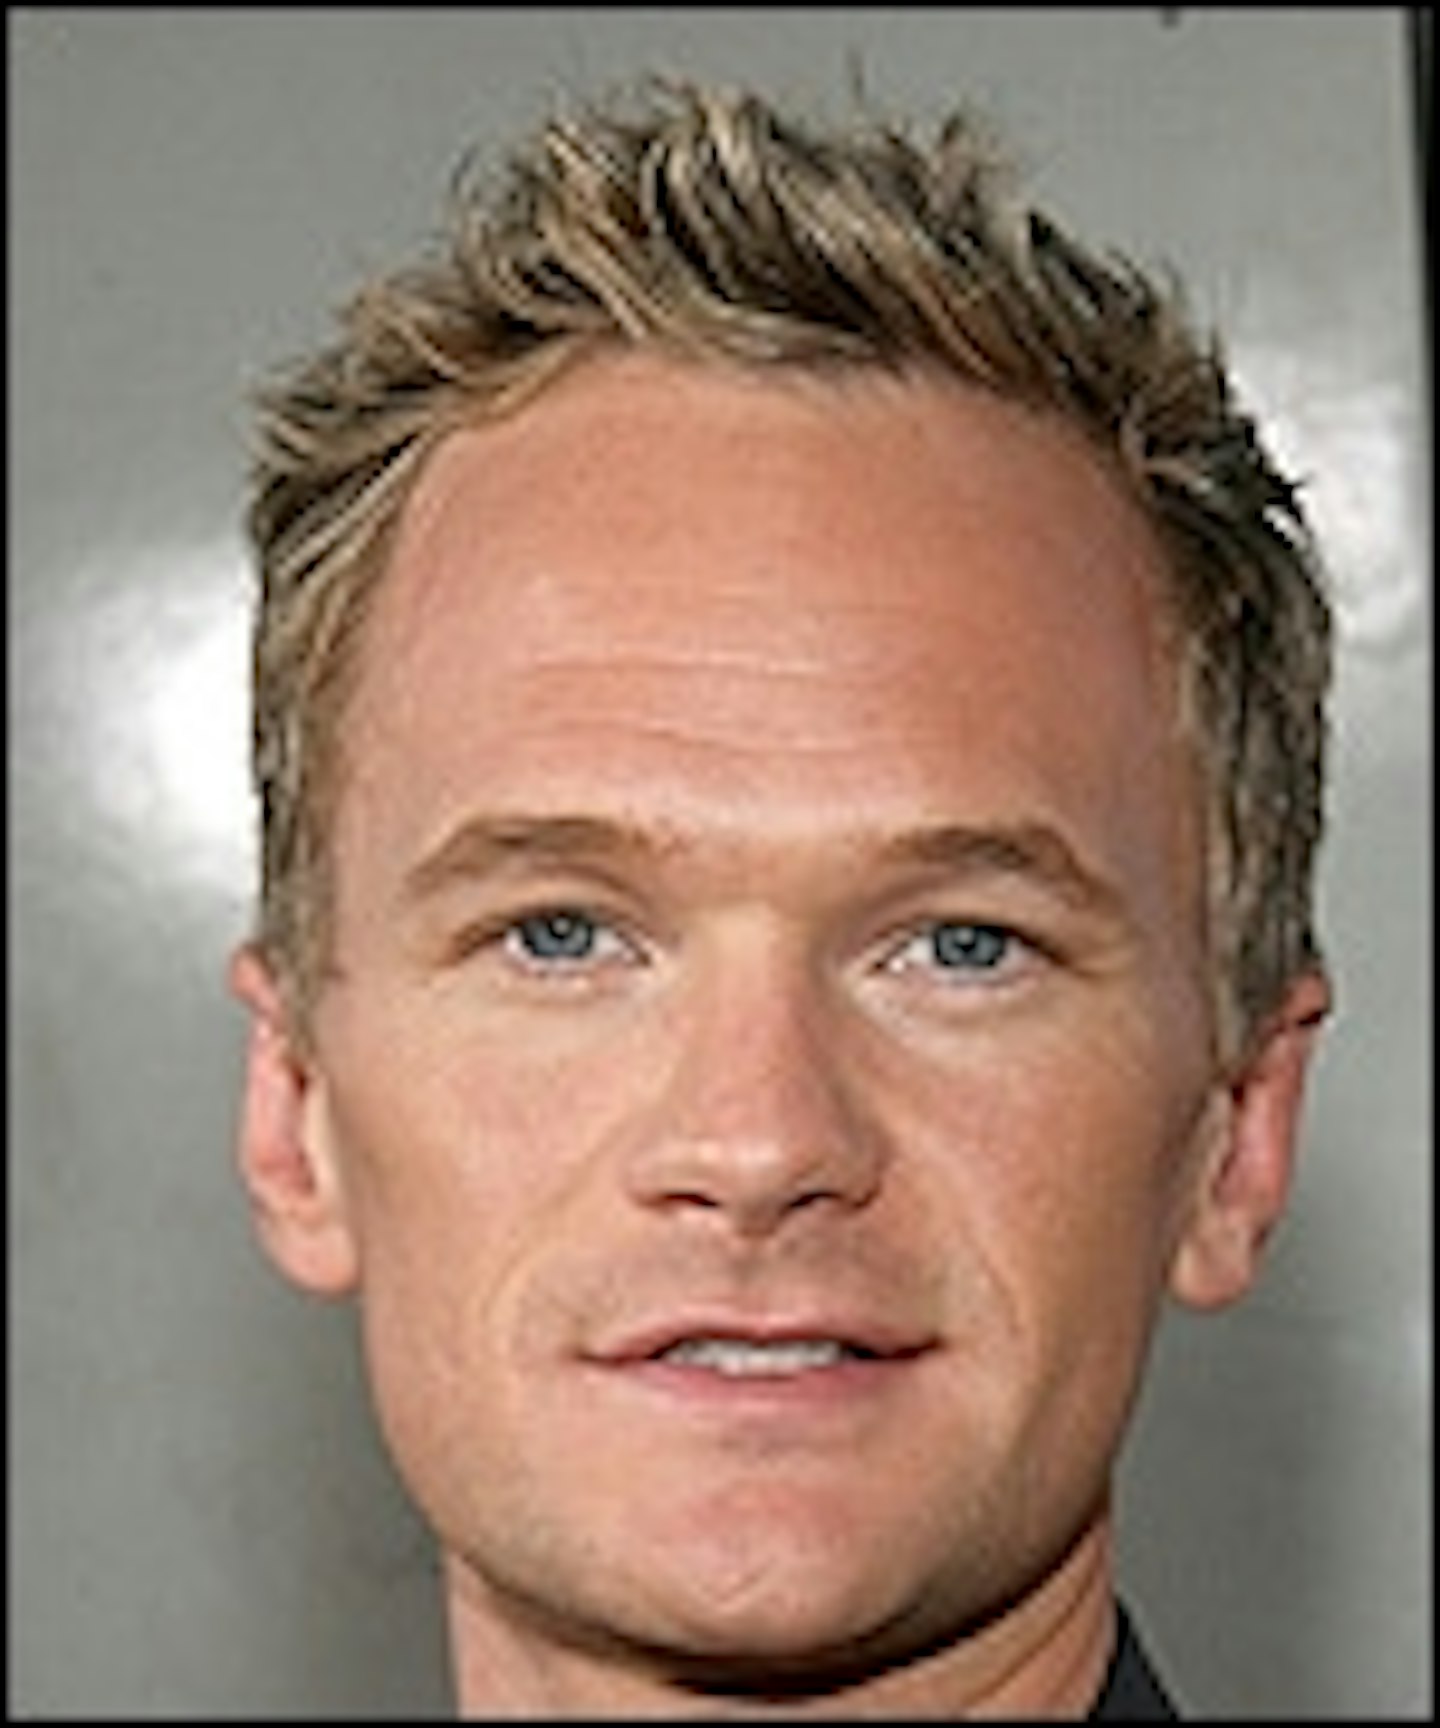 Two New Movies For Neil Patrick Harris